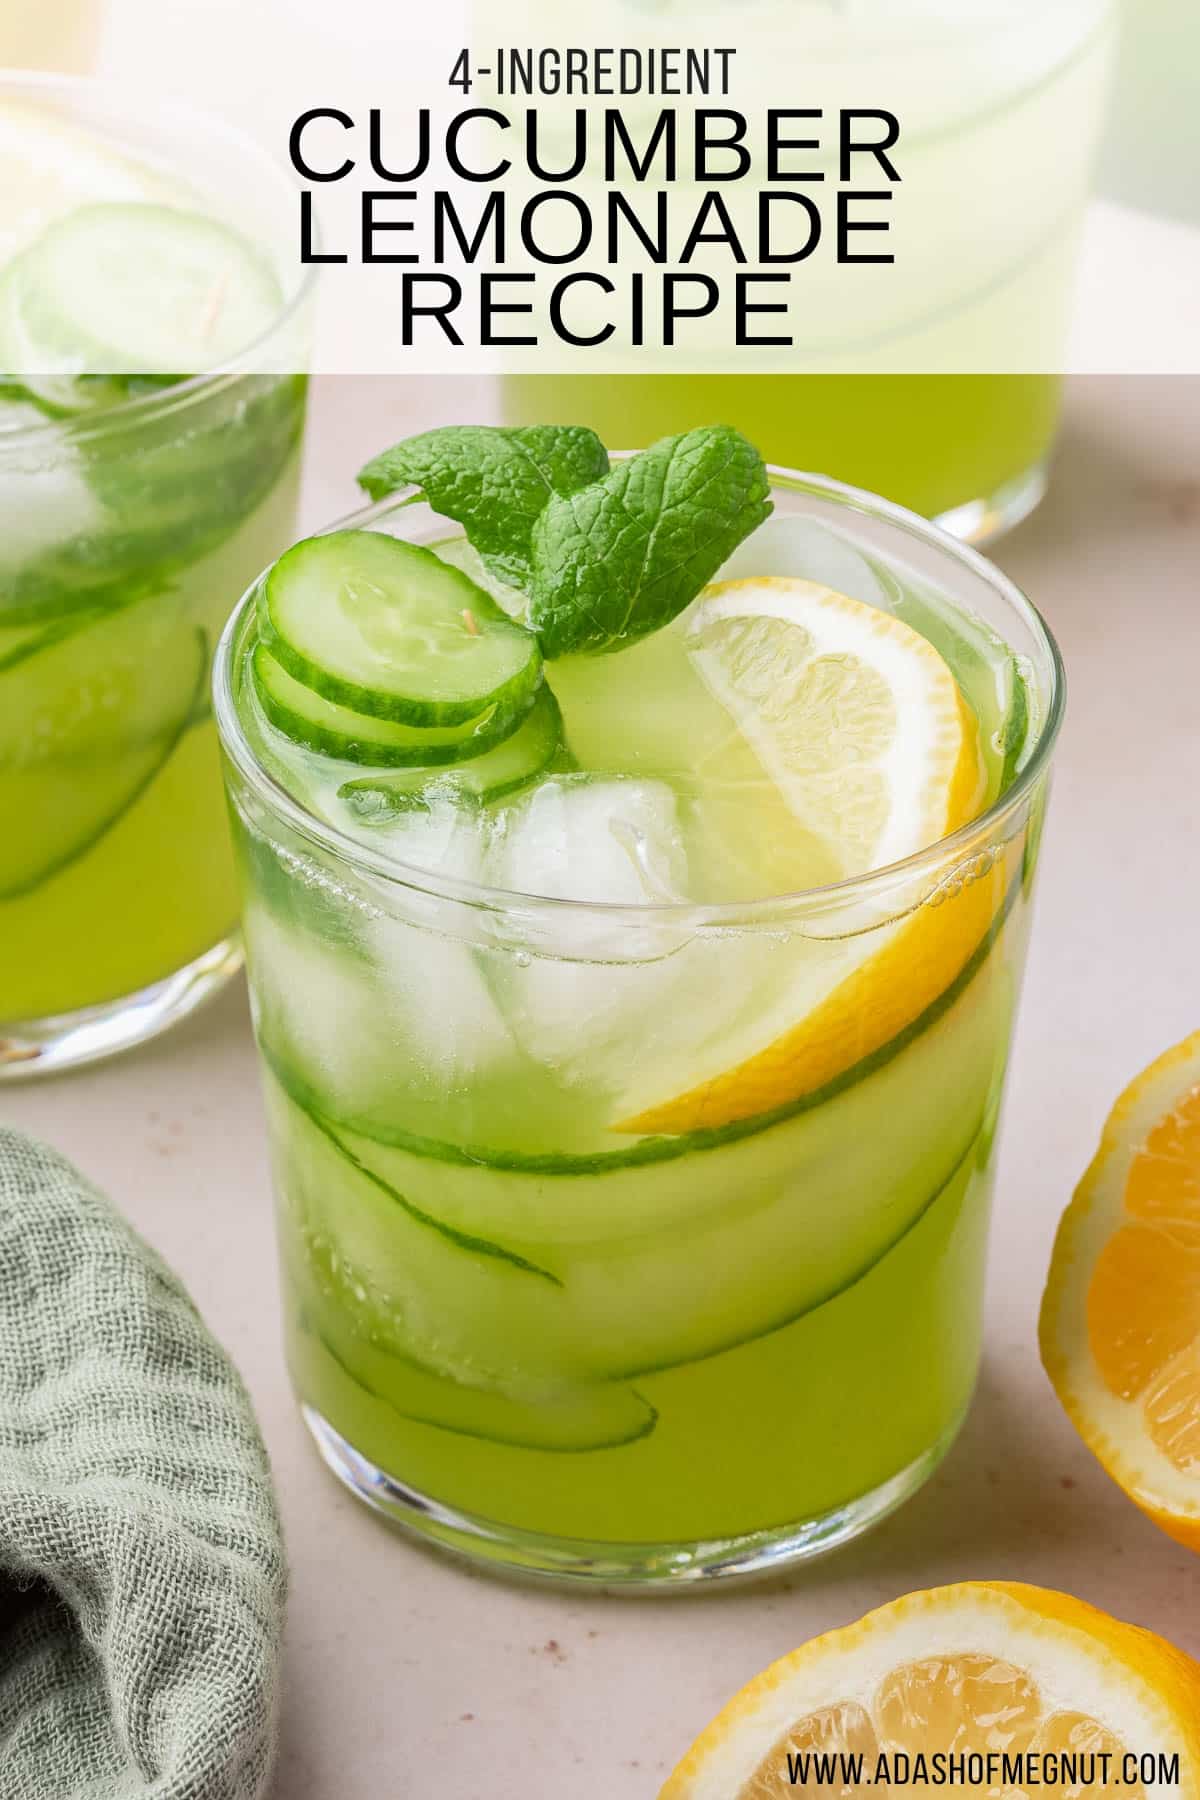 A glass of light green lemonade with cucumber ribbons, mint, ice cubes and a lemon wedge with additional glasses of lemonade in the background.